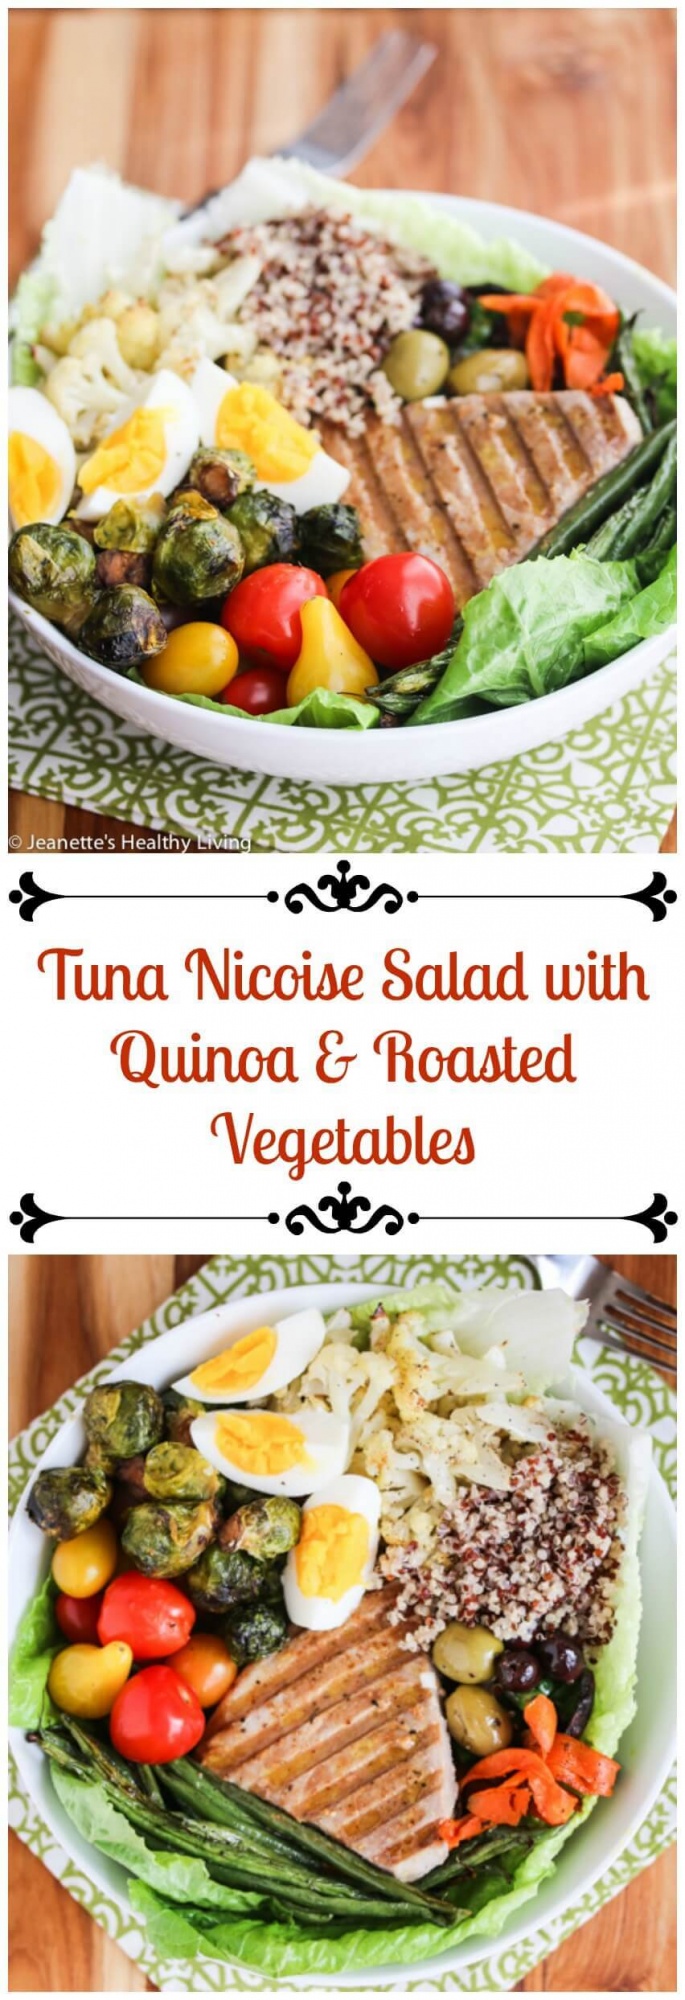 Winter Tuna Nicoise Salad with Quinoa and Roasted Vegetables - This one bowl meal is packed with protein and a rainbow of vegetables, served with a simple lemon vinaigrette